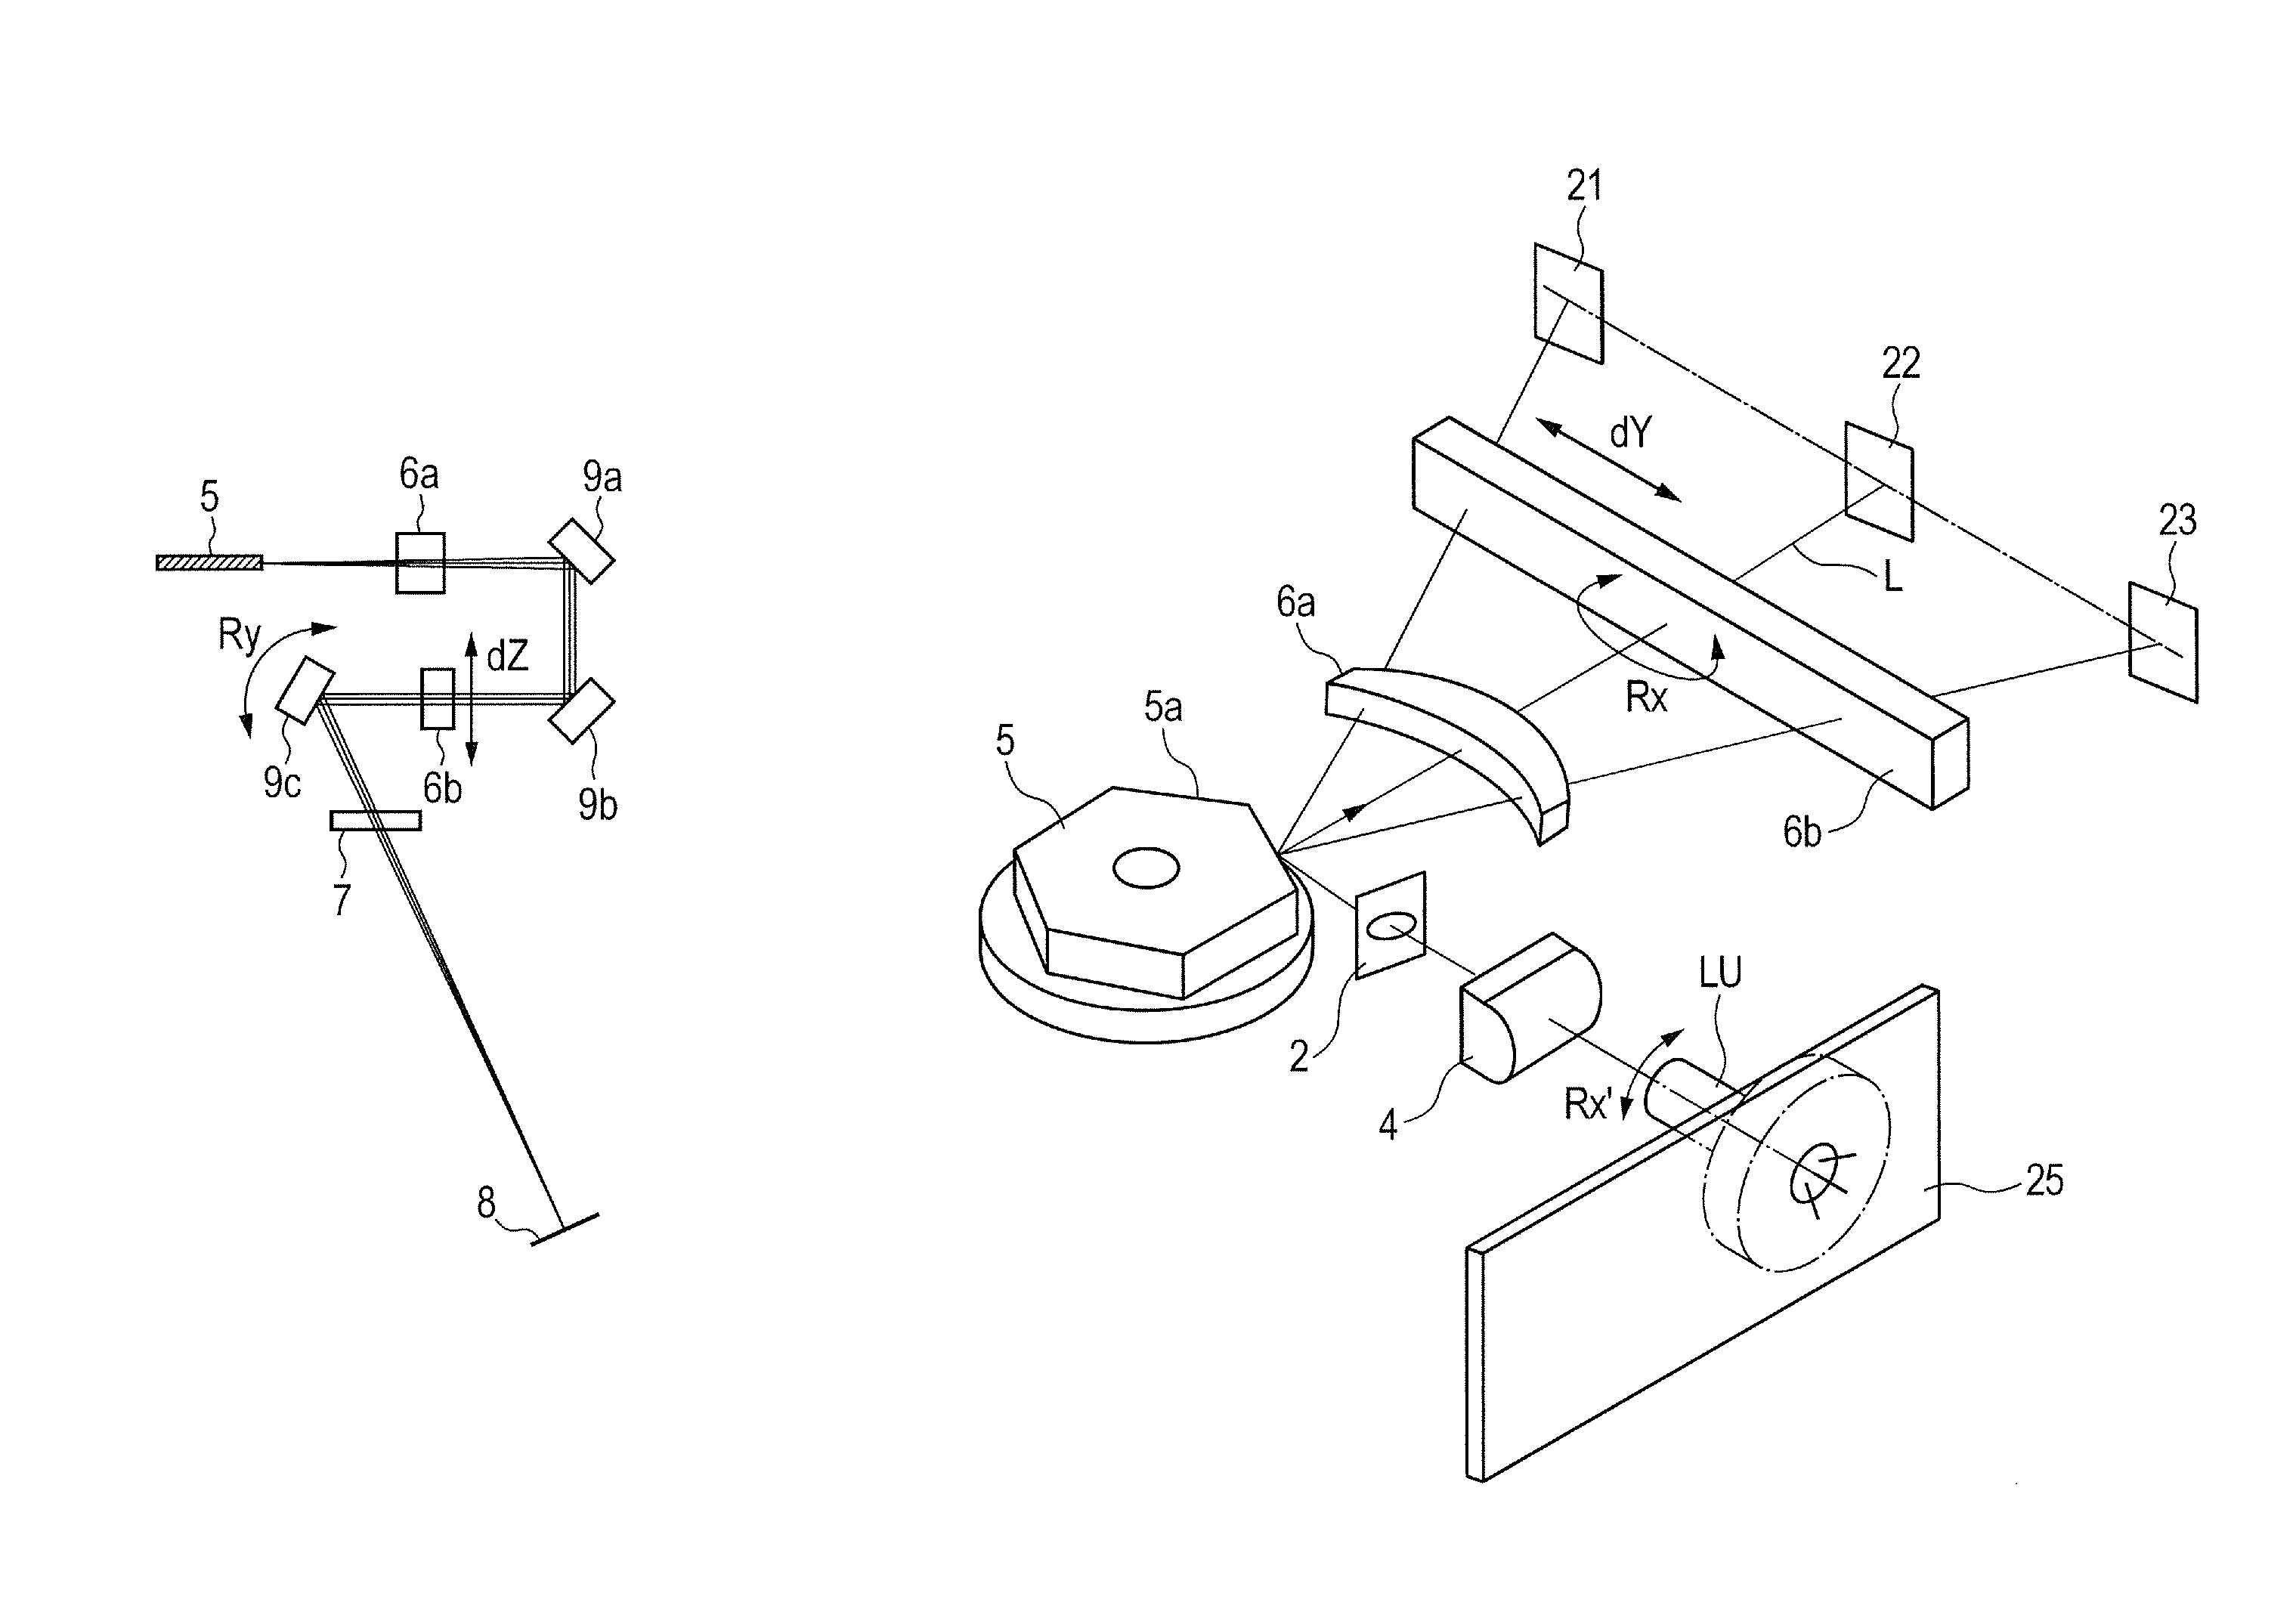 Method of assembling and adjusting a multi-beam scanning optical apparatus and method of manufacturing a multi-beam scanning optical apparatus